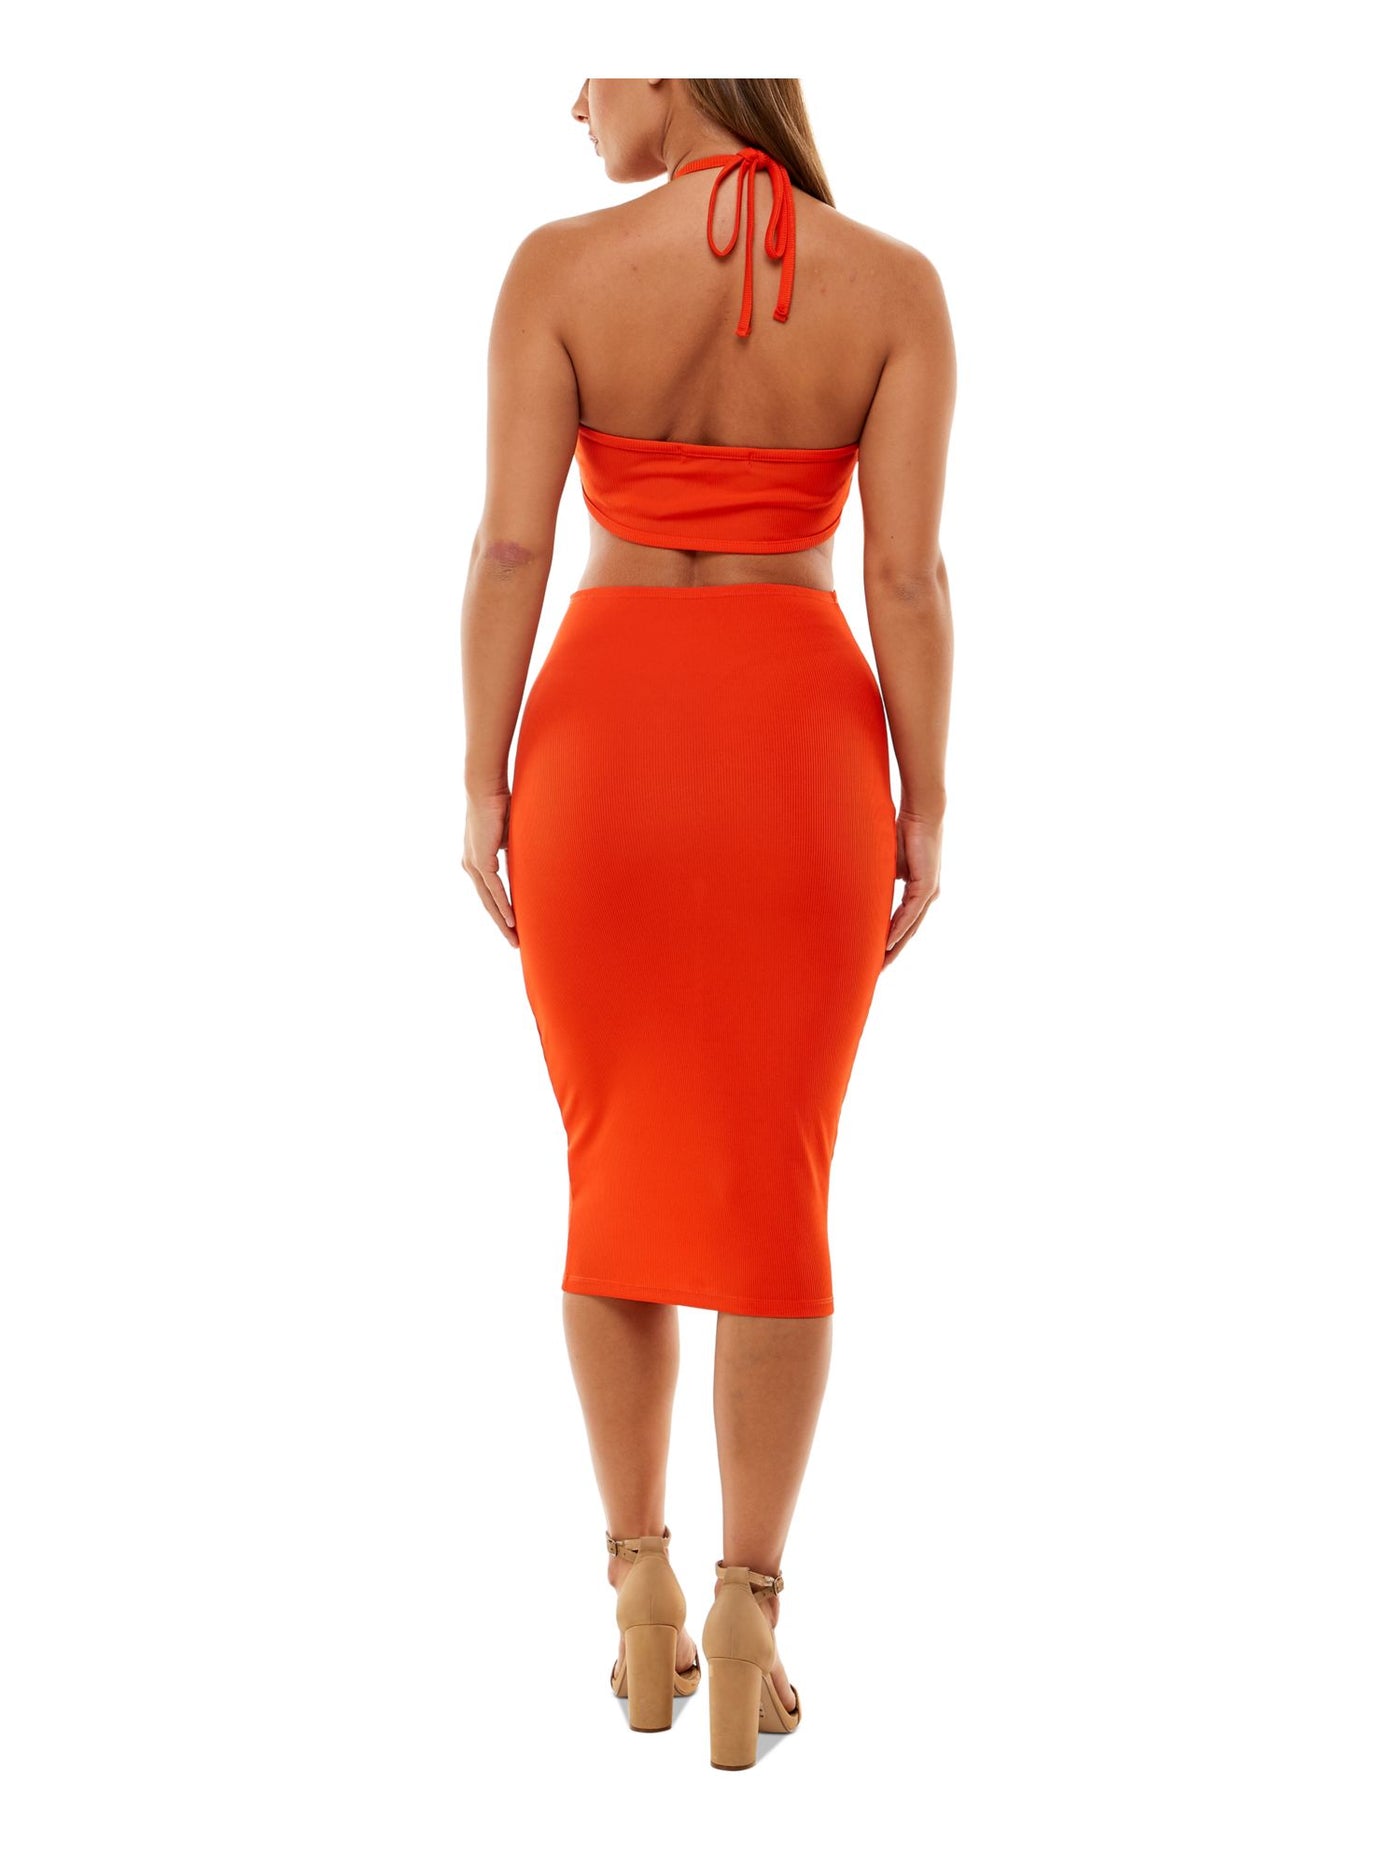 ALMOST FAMOUS Womens Ribbed Cut Out Jersey Knit Tie Neck Sleeveless Halter Below The Knee Party Body Con Dress